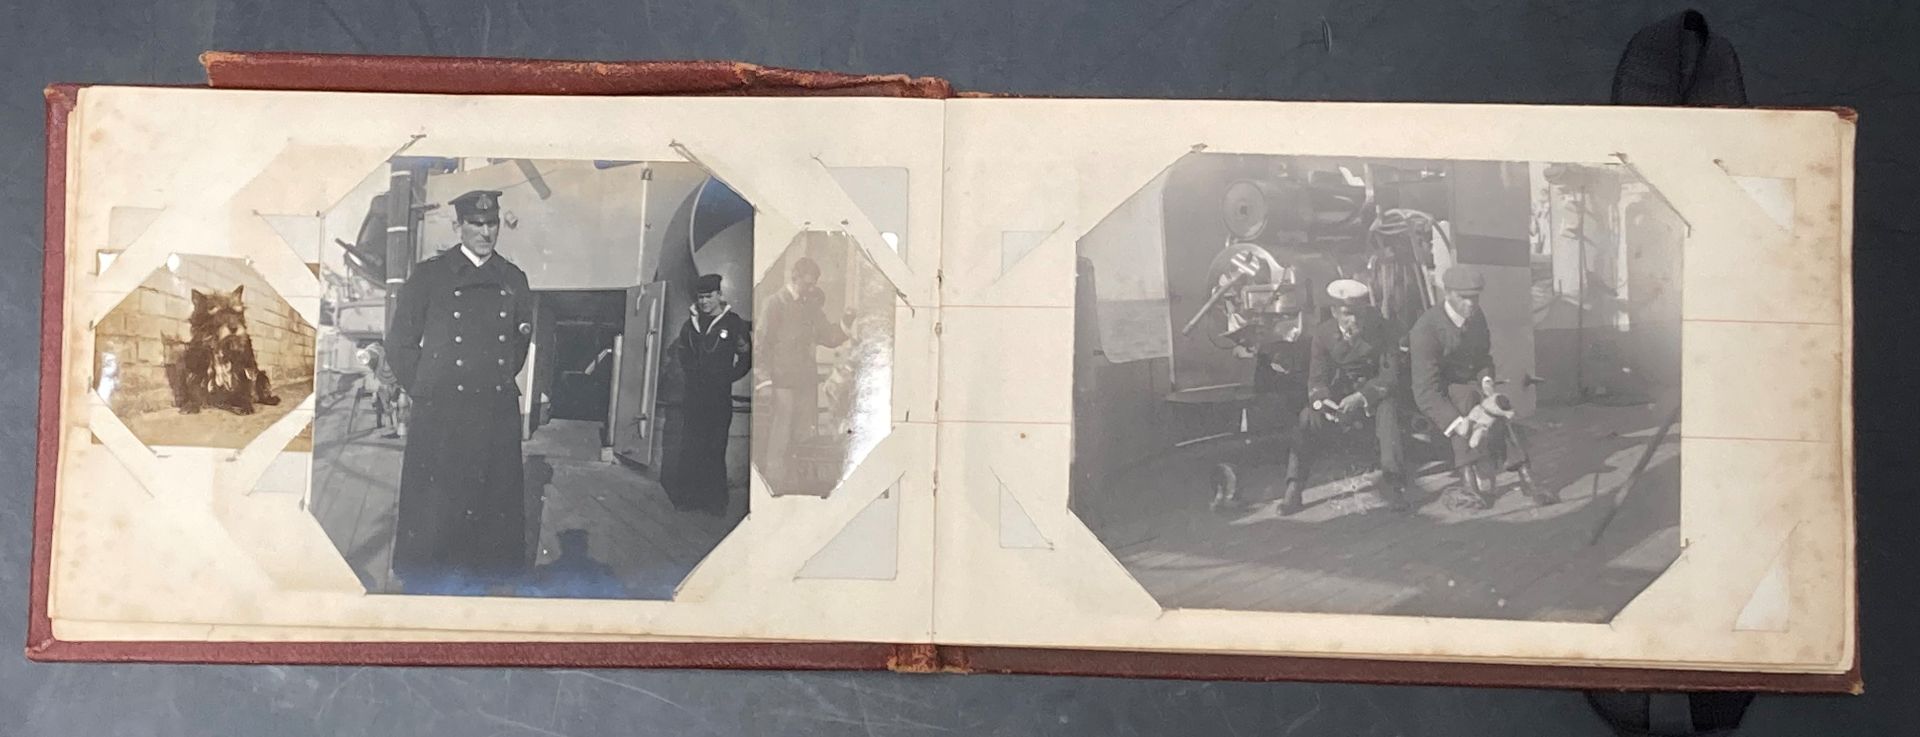 Photograph album relating to Captain Henry Maclean Fothergill who served in the Boxer Rebellion - Image 6 of 10